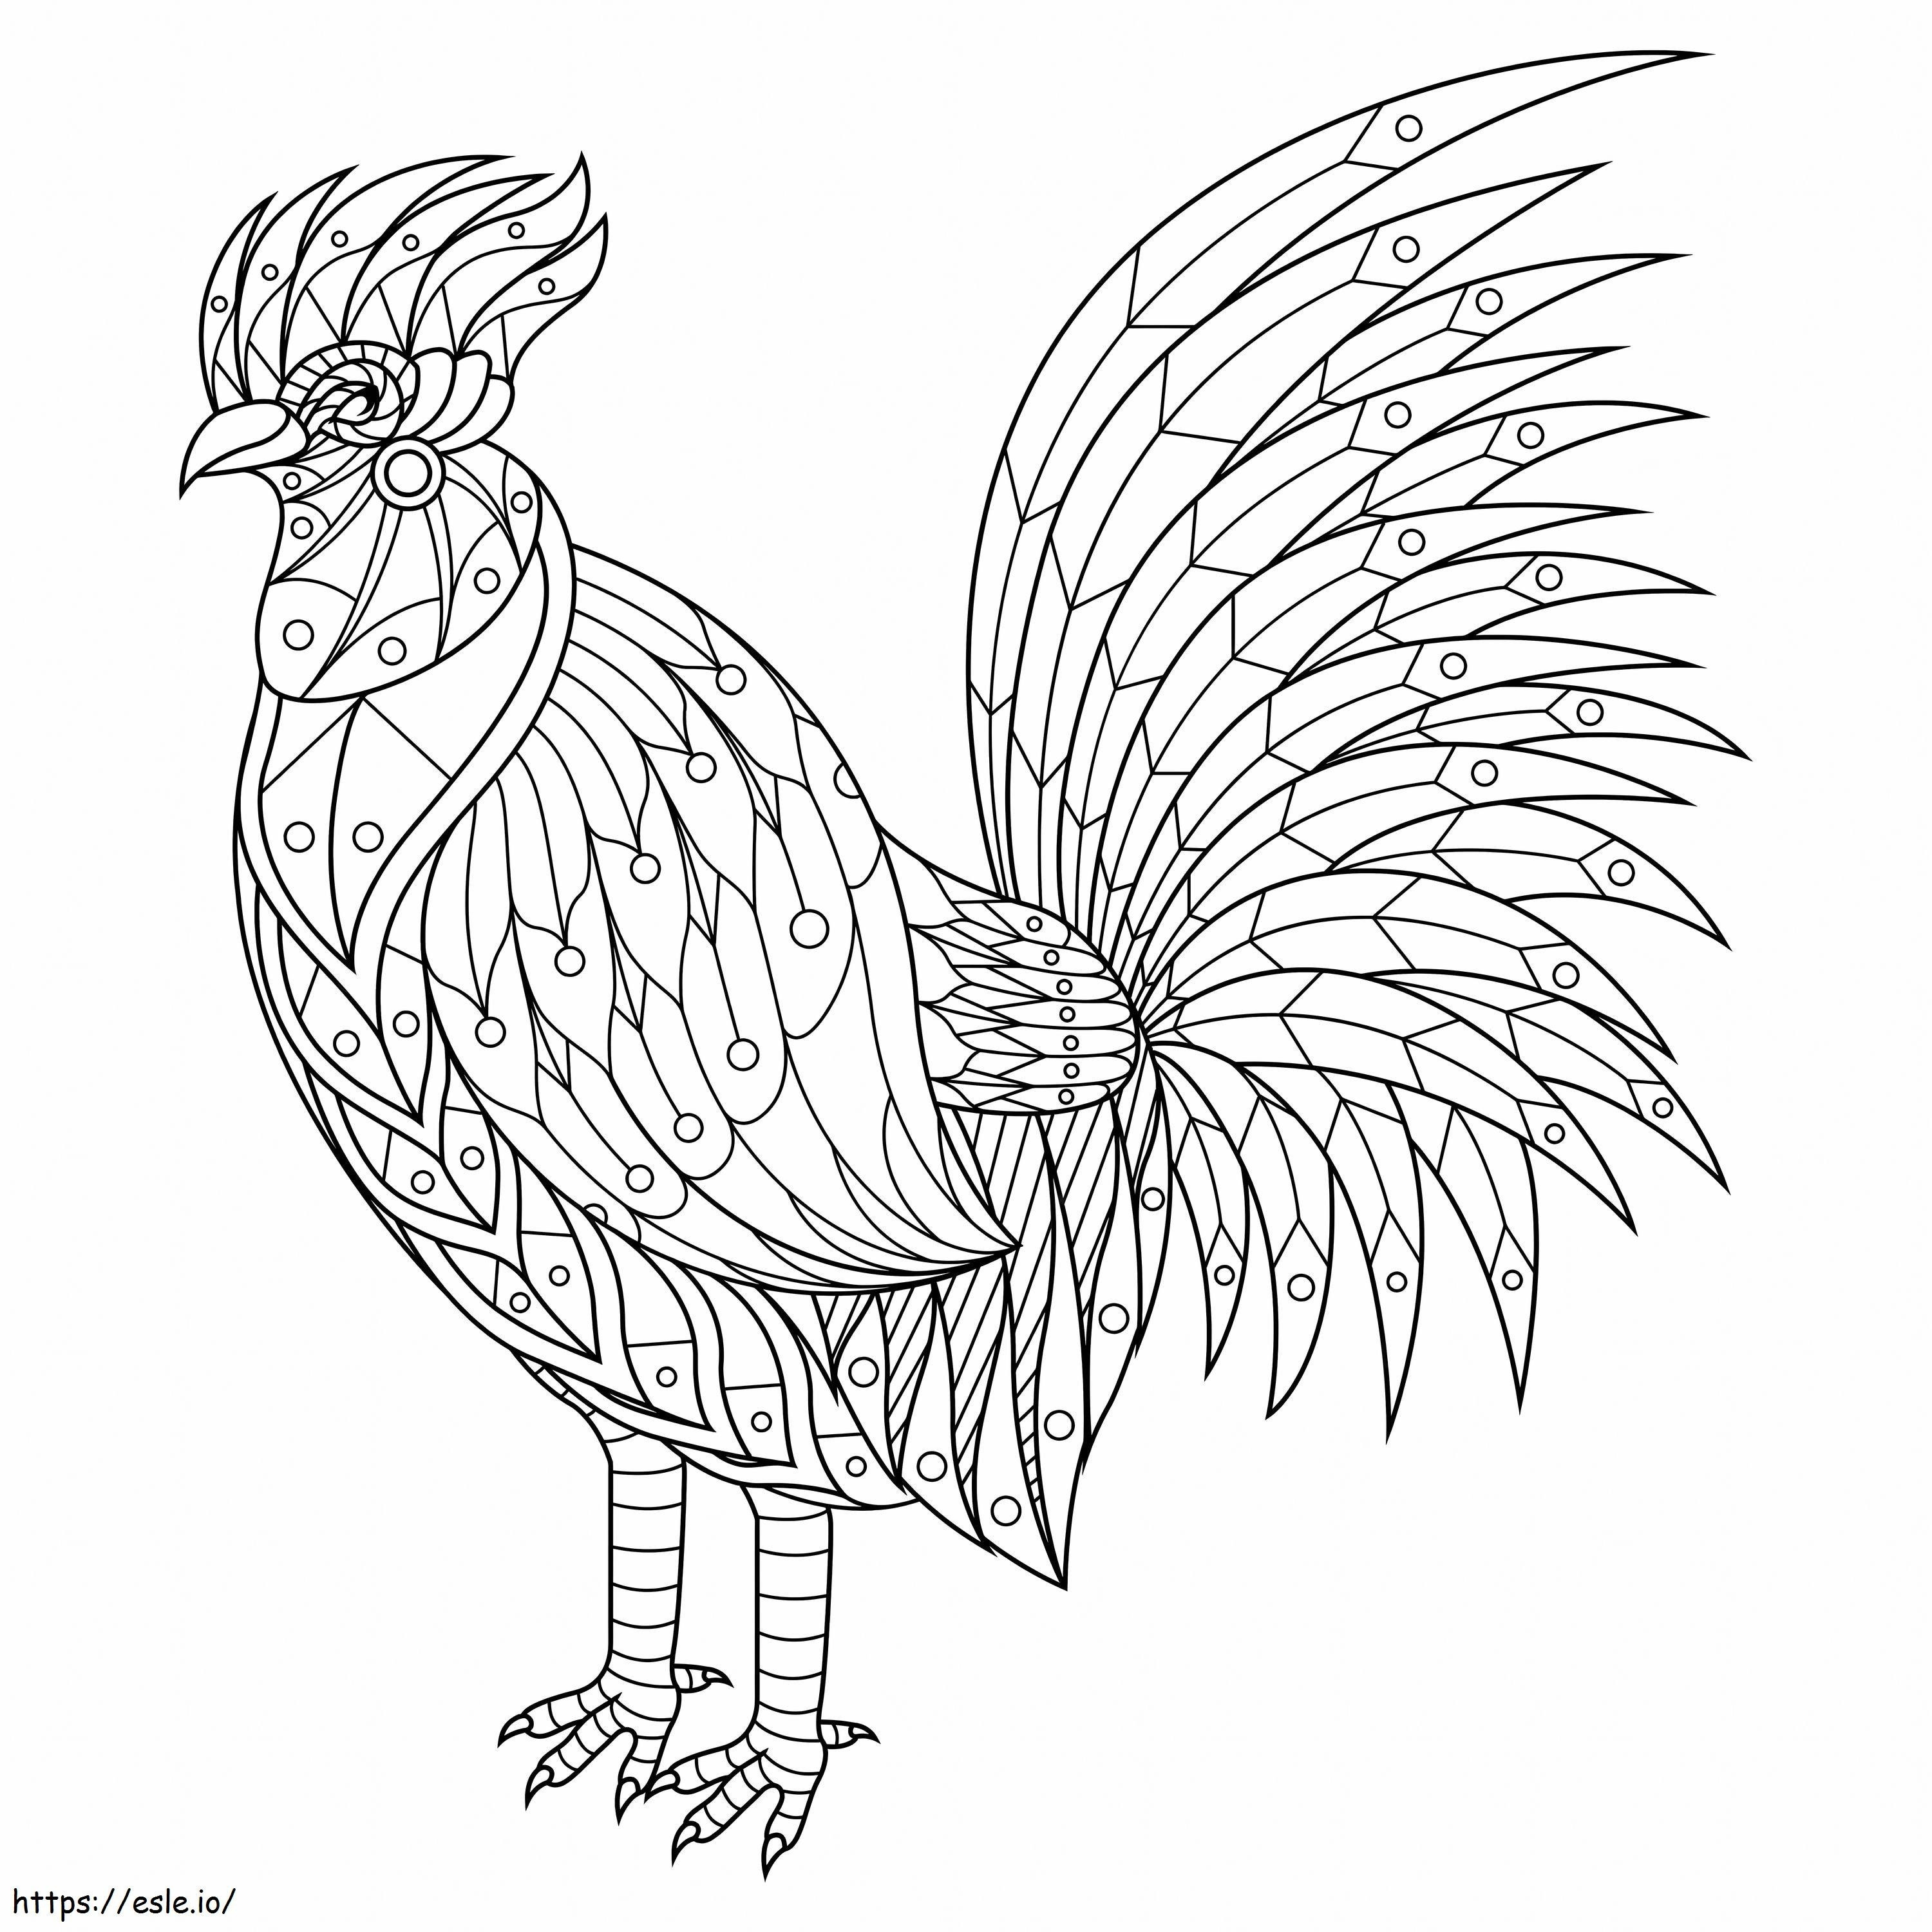 Rooster Is For Adult coloring page